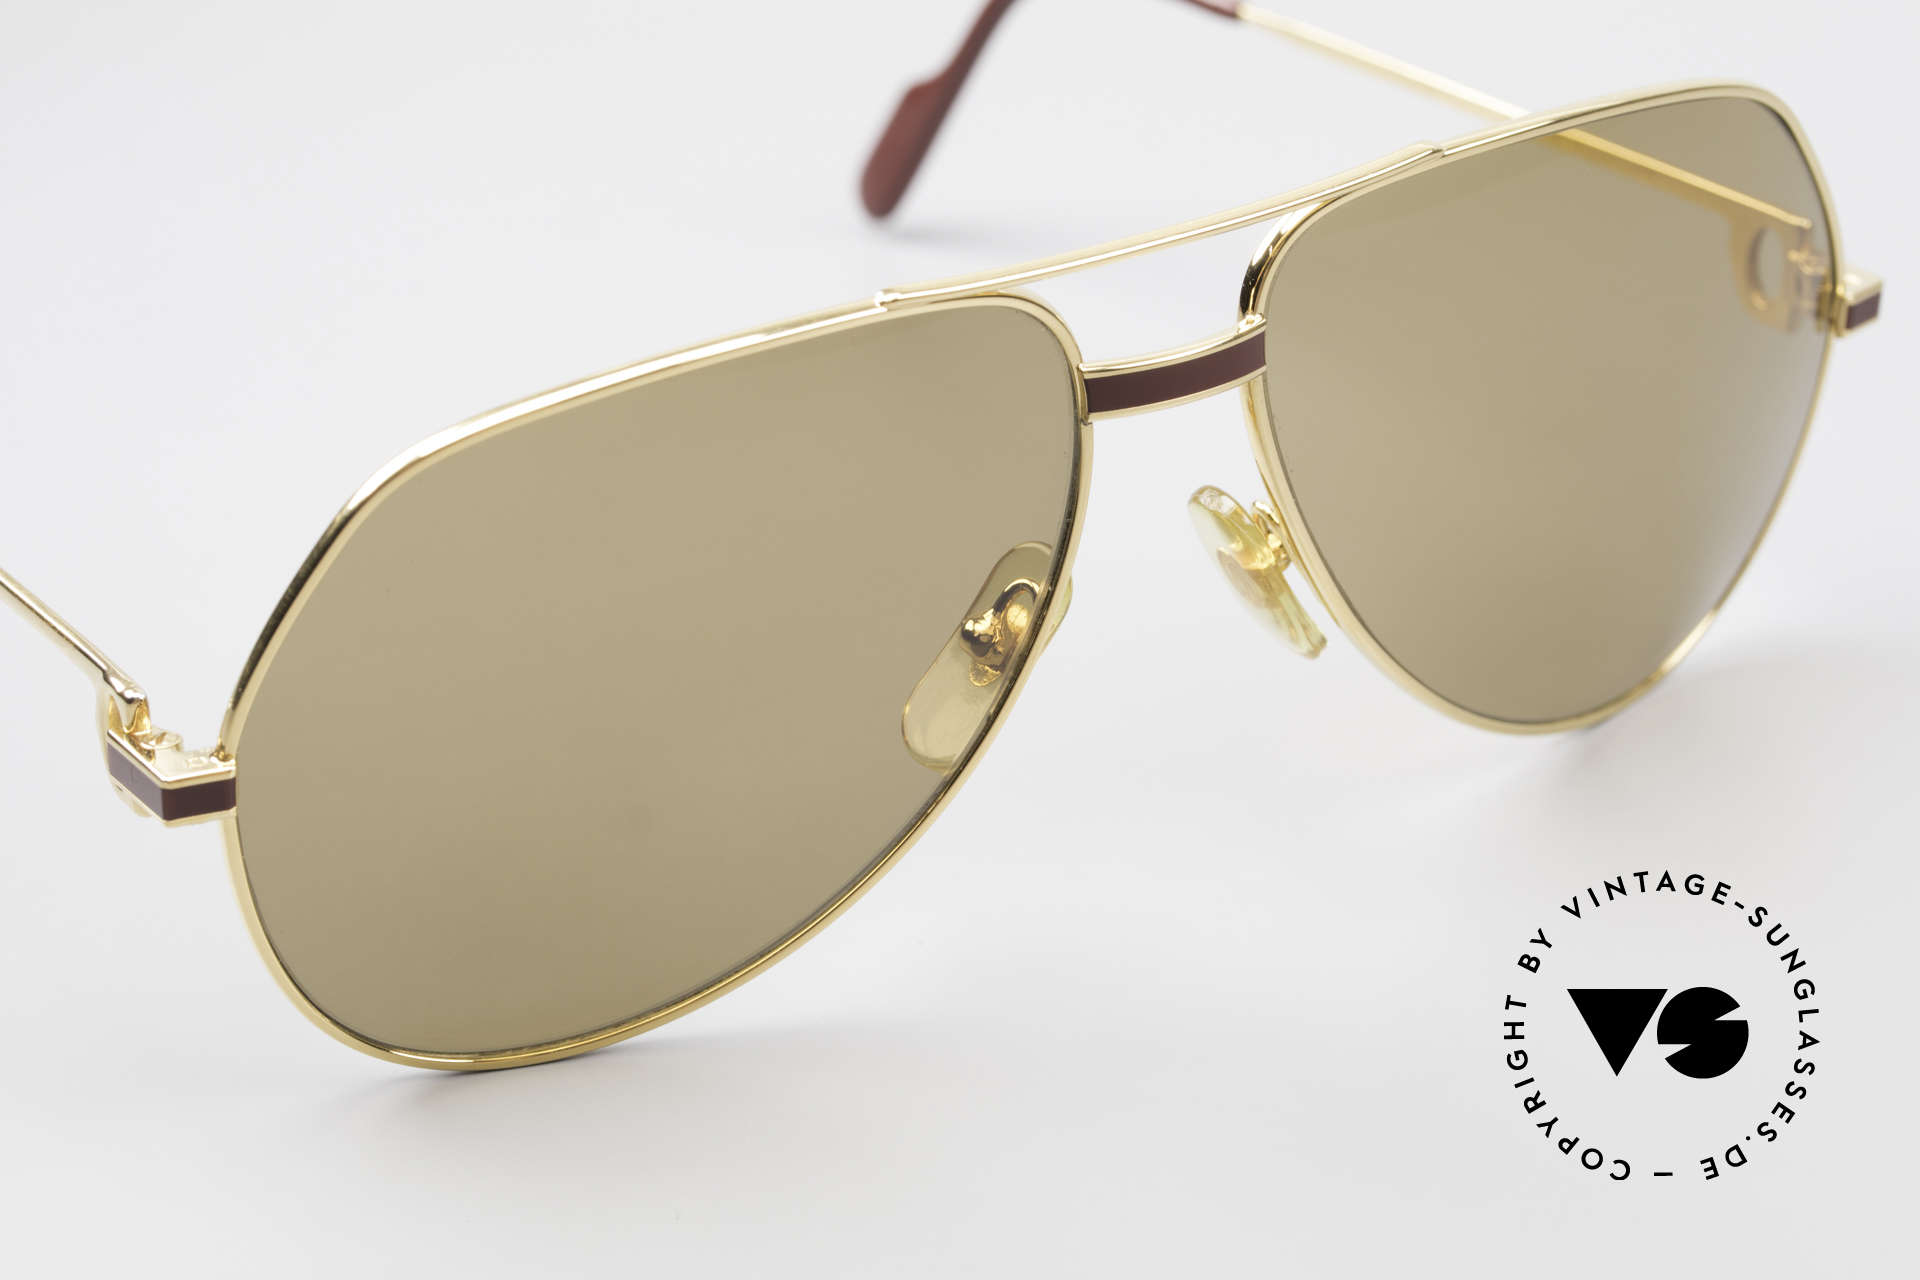 Cartier Vendome Laque - L Mystic Cartier Mineral Lenses, ! BREATH on the sun lenses to make the logo VISIBLE!, Made for Men